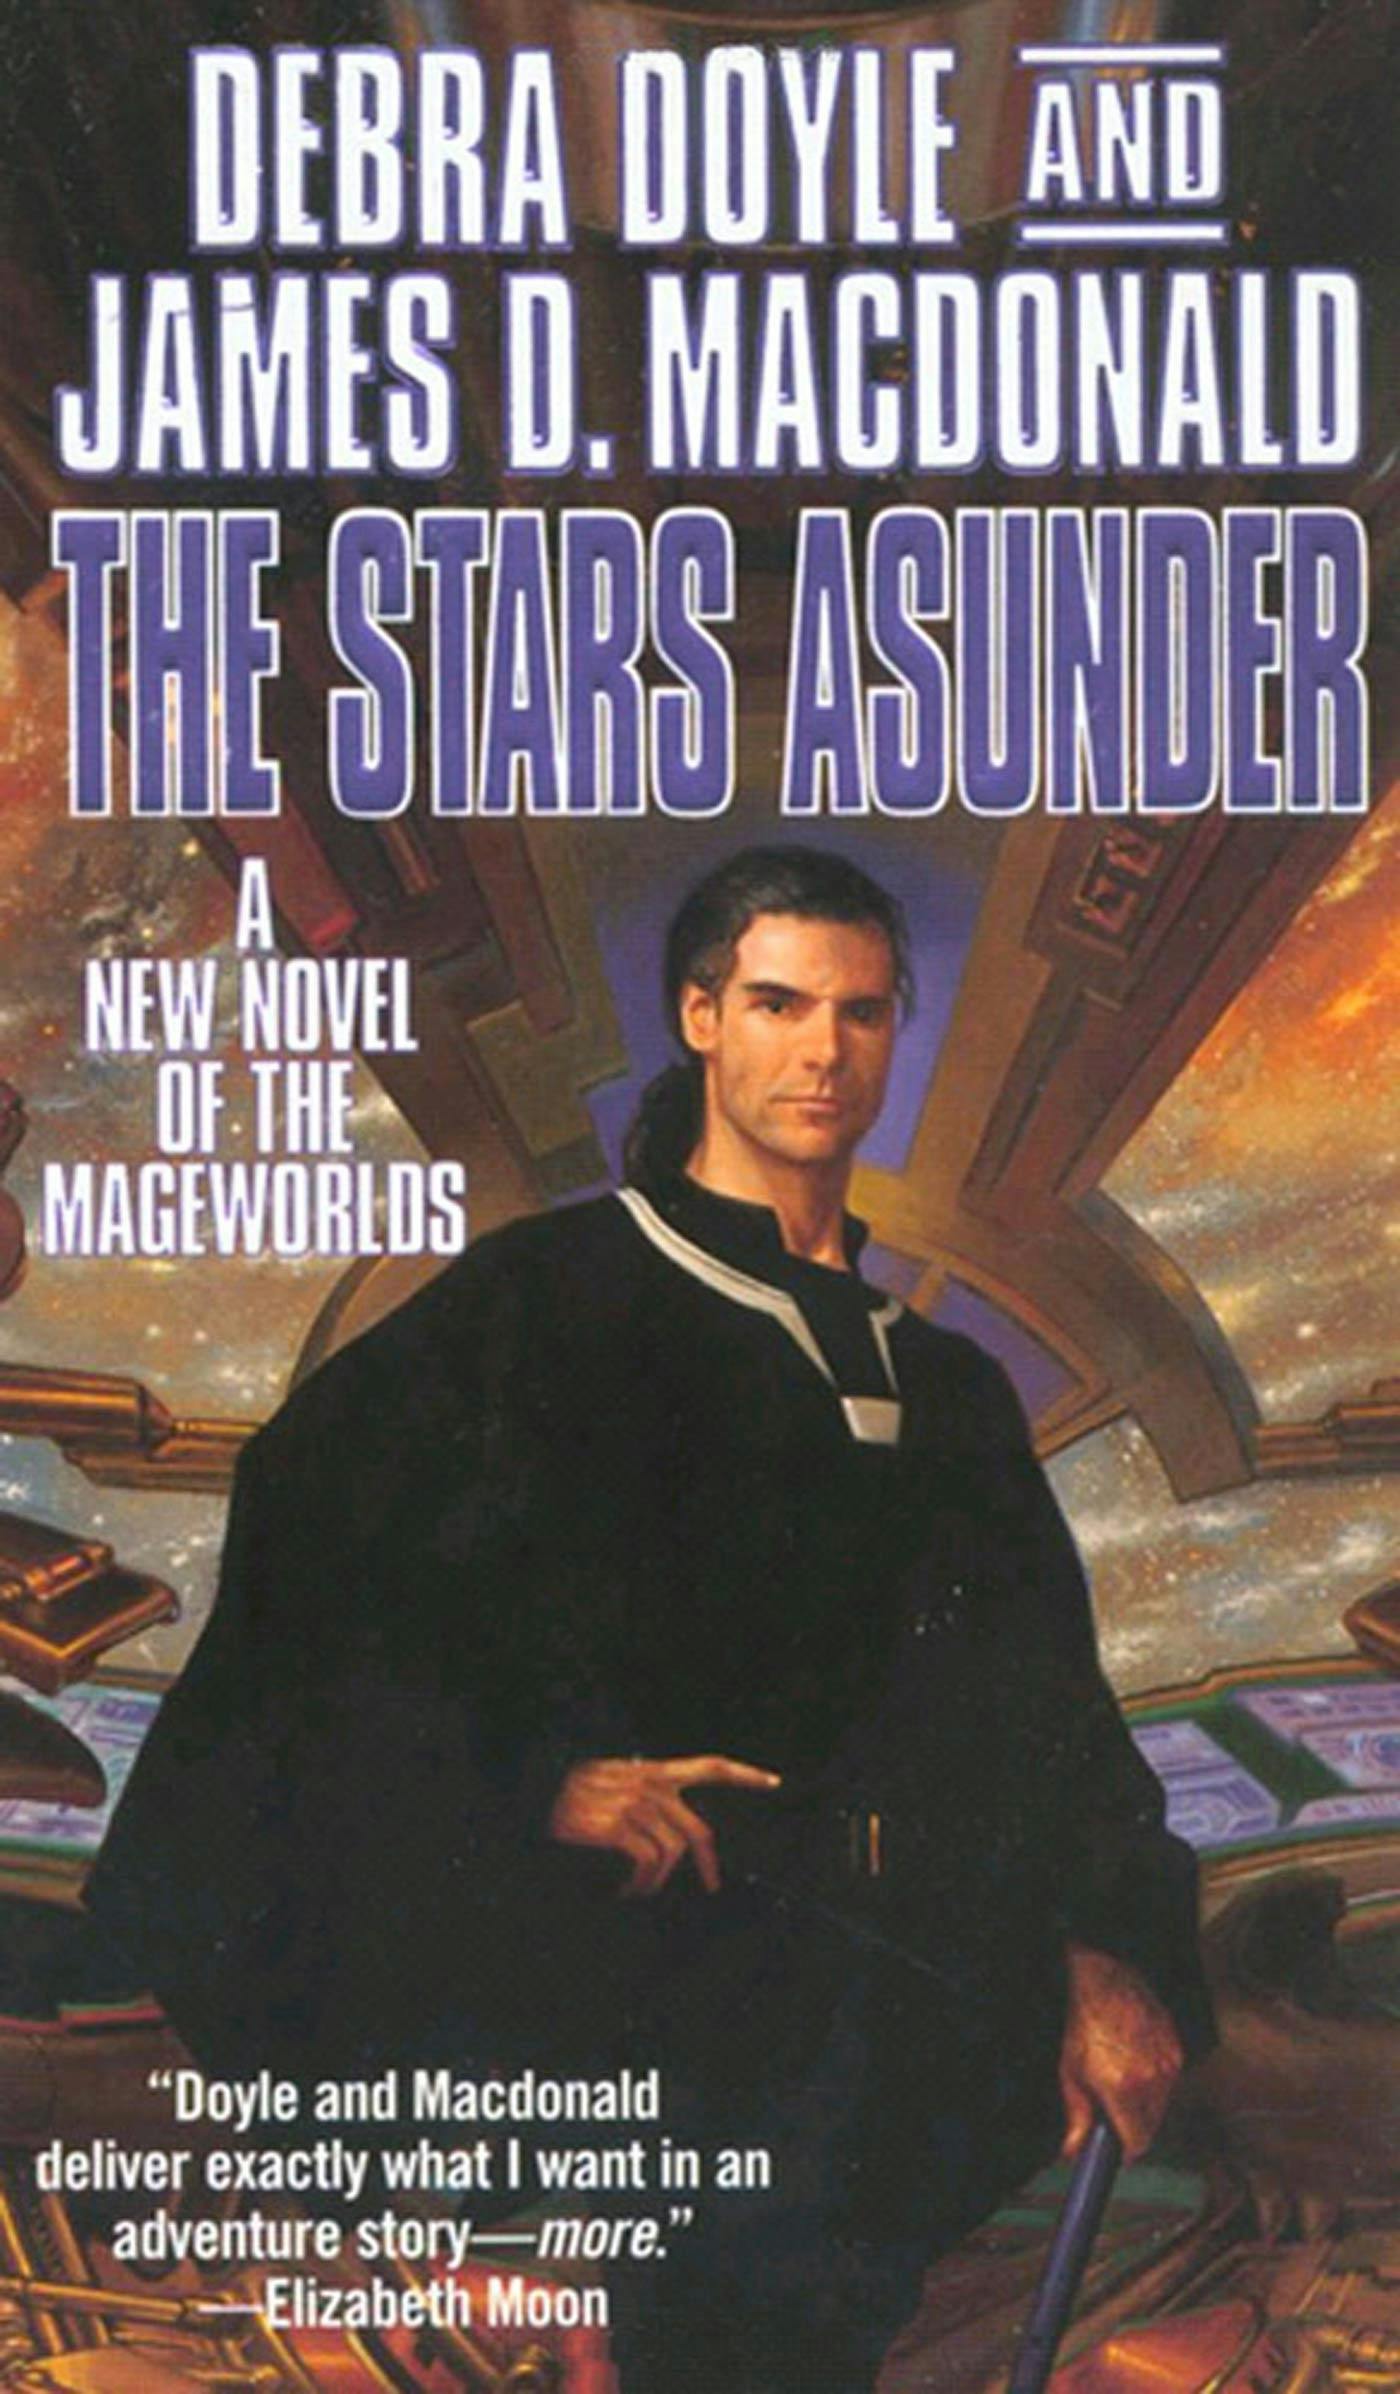 Cover for the book titled as: The Stars Asunder